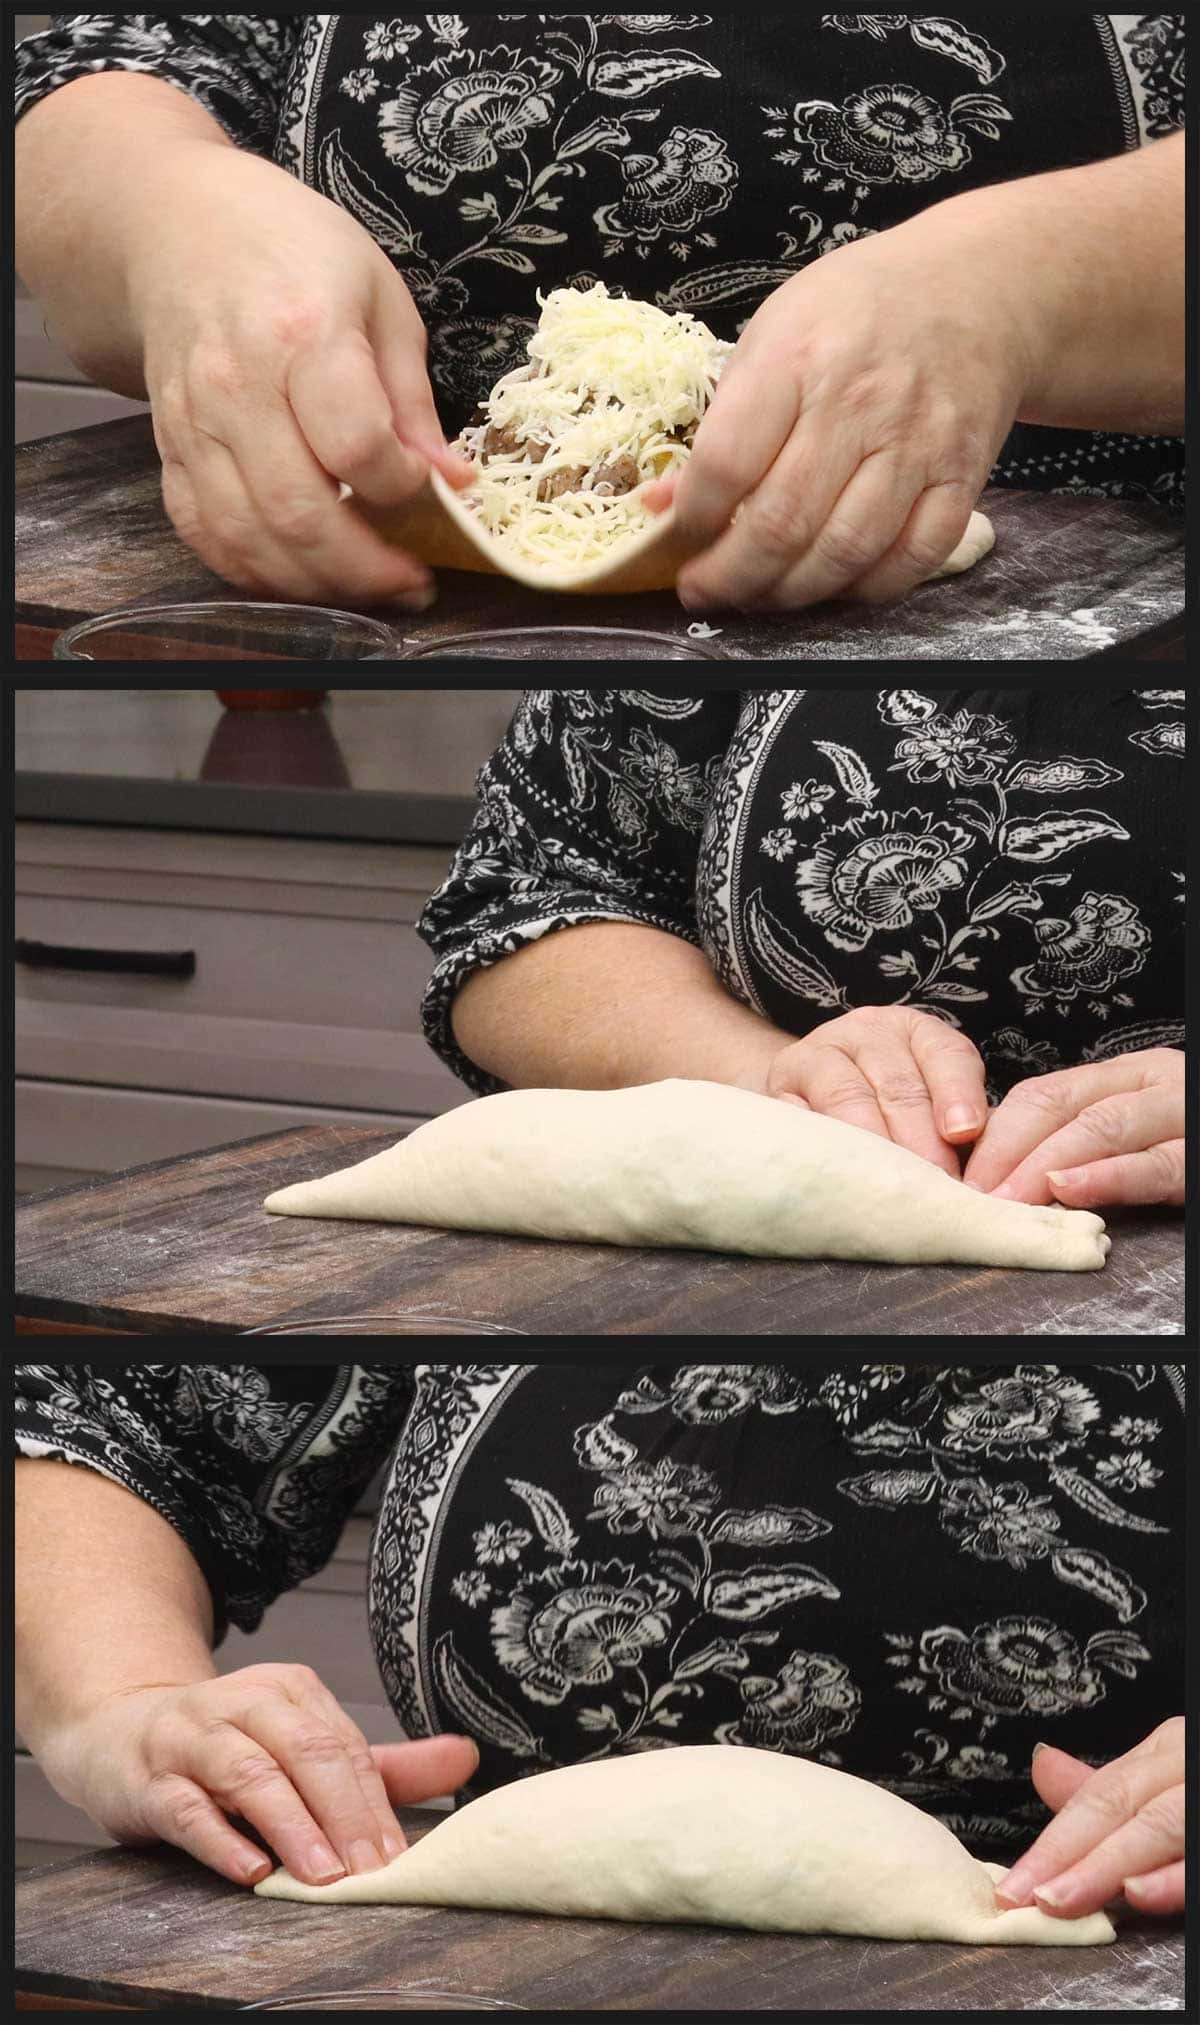 moving the fillings around inside the calzone and sealing the edges.